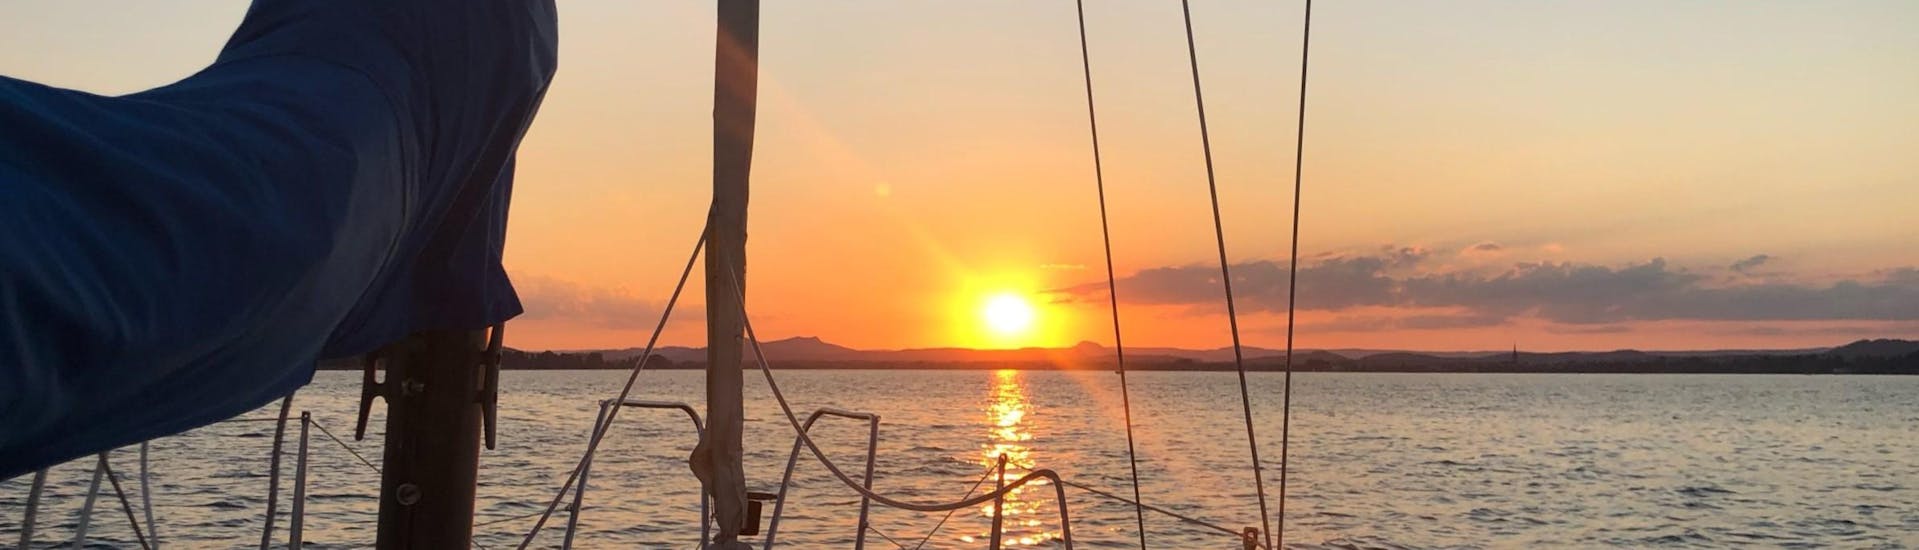 A beautiful sunset as seen during a romantic sailing trip on Lake Constance with MB Events & Adventures.